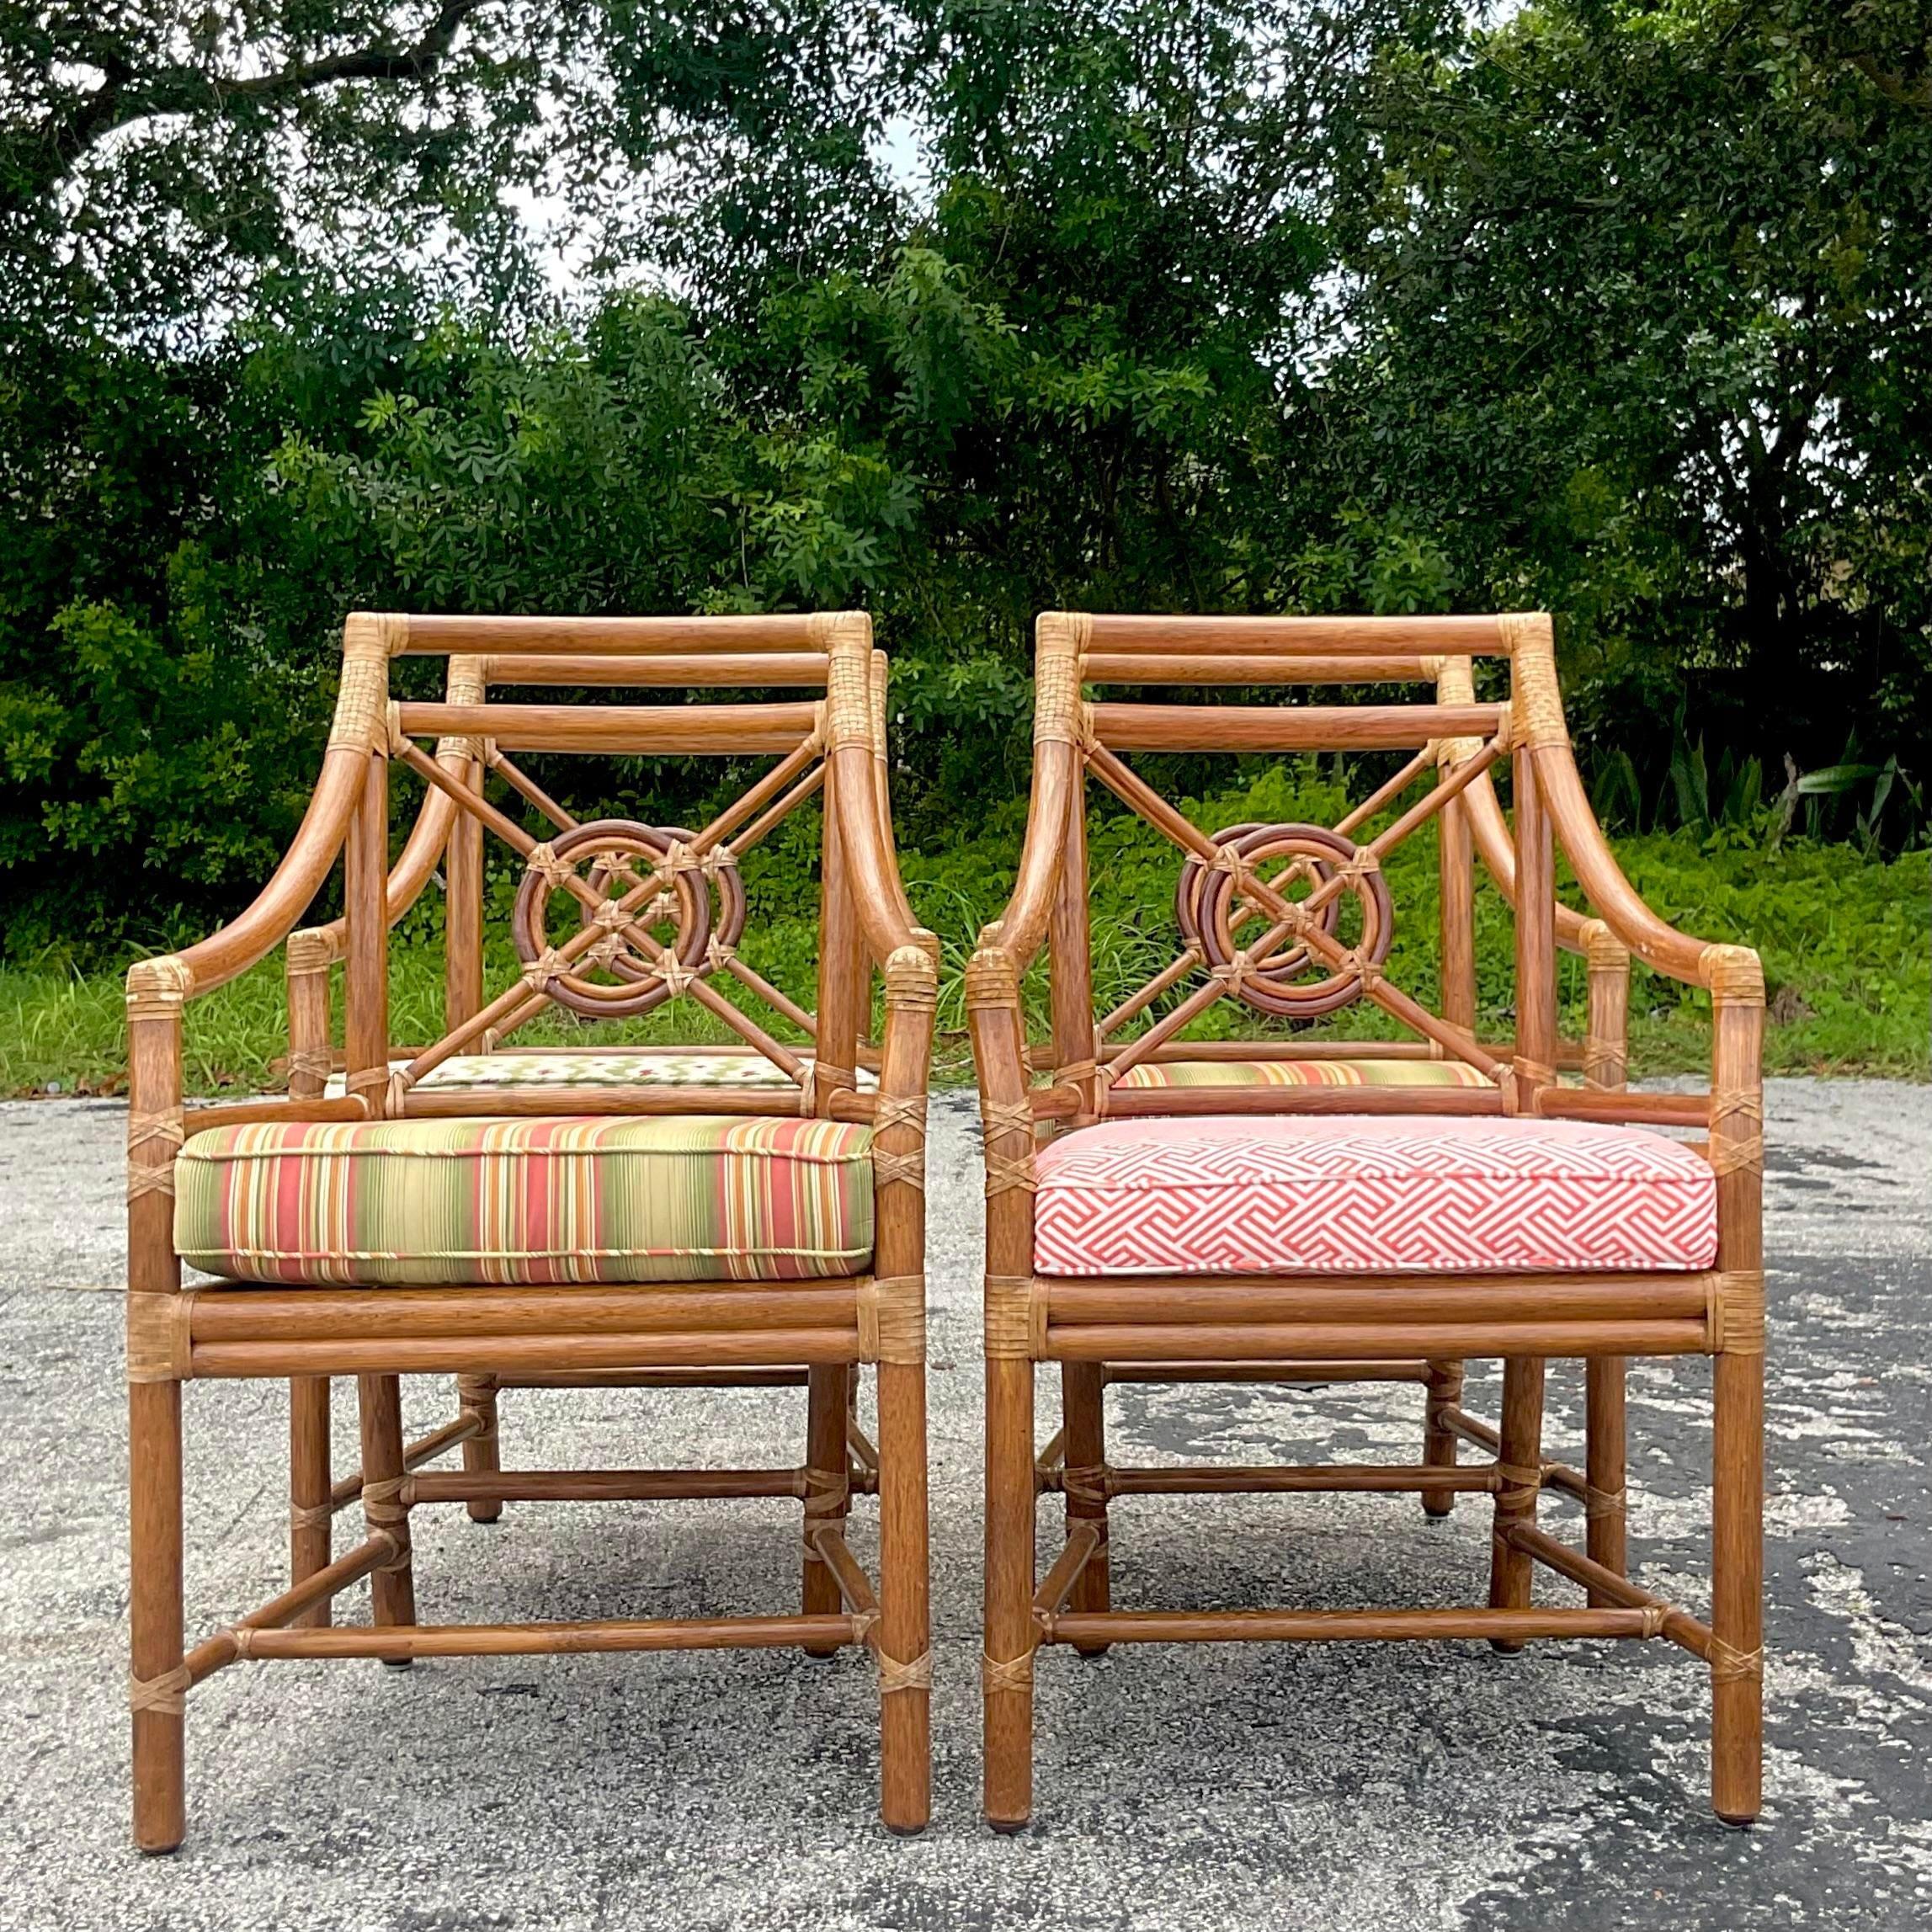 Upholstery Vintage Coastal McGuire Target Back Rattan Dining Chairs - Set of 4